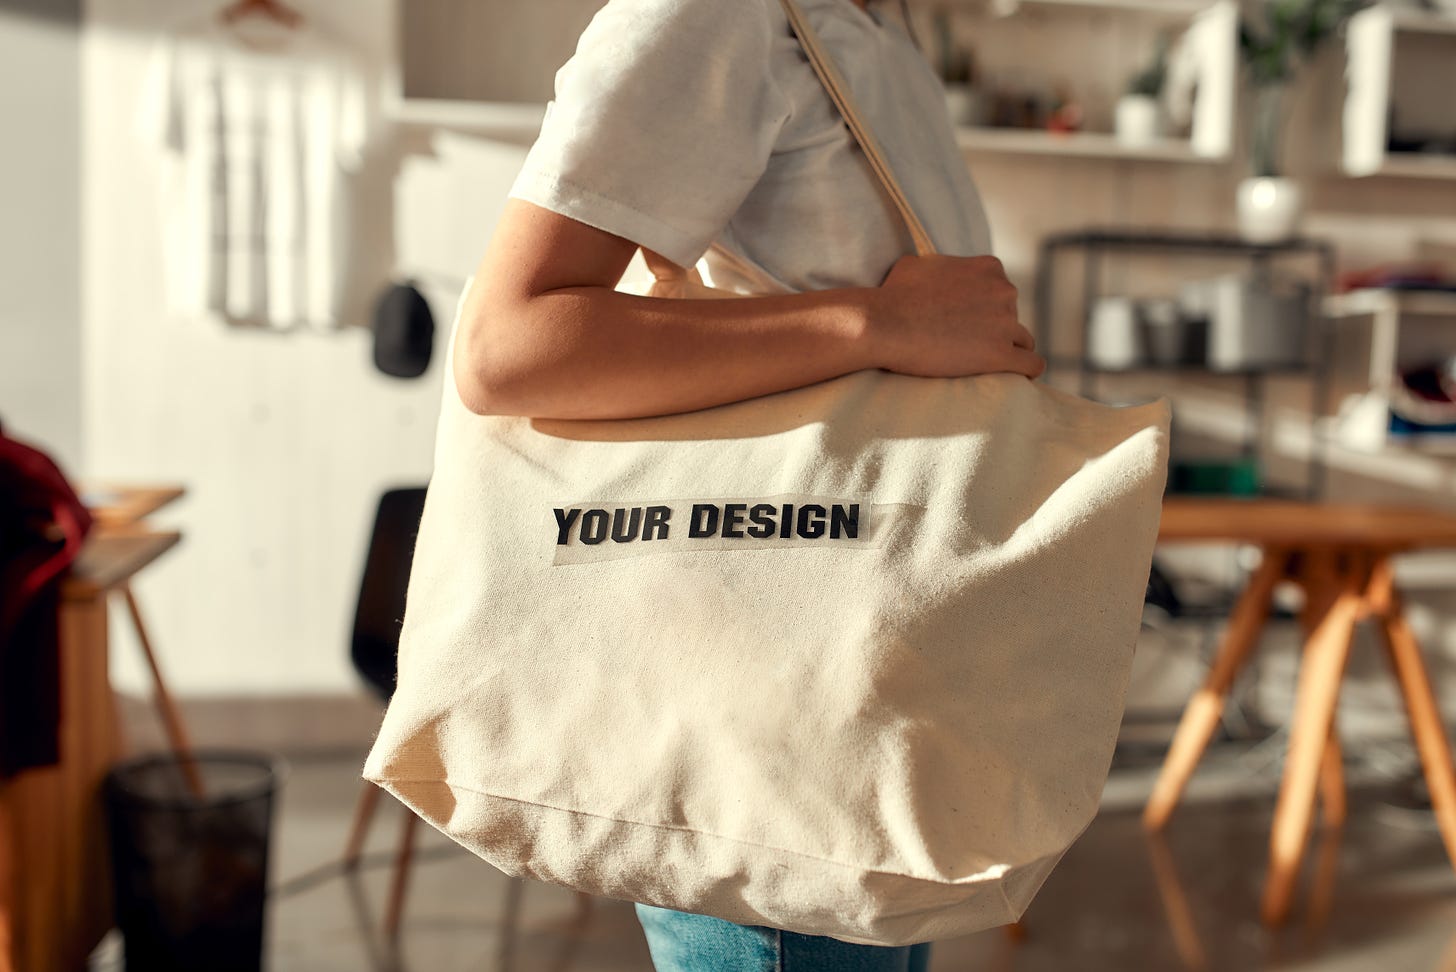 A white woman holding a canvas bag that reads "Your Design".